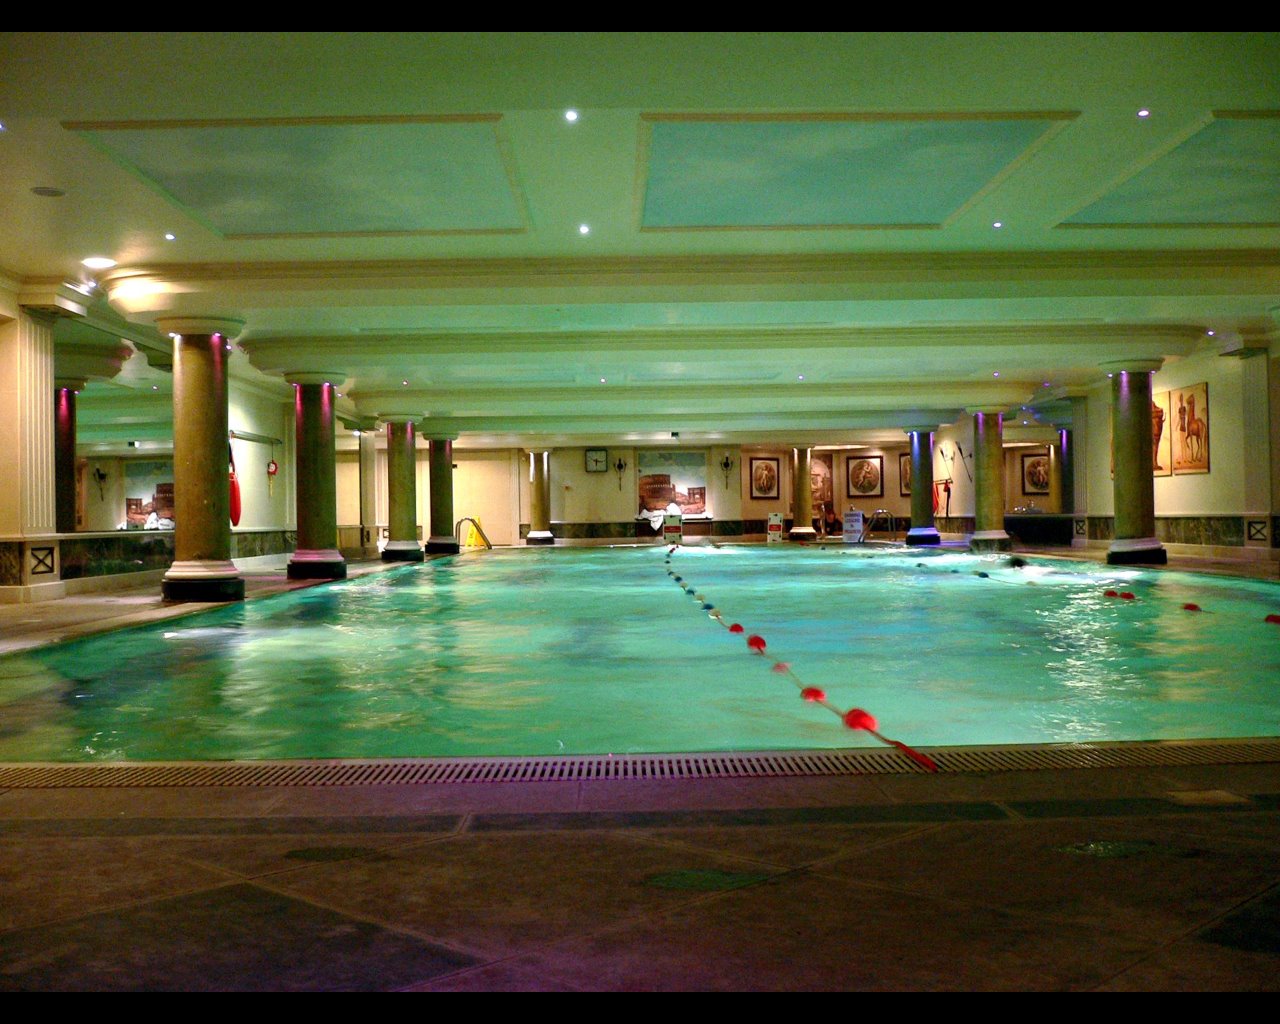 a large indoor swimming pool in an el with large pillars